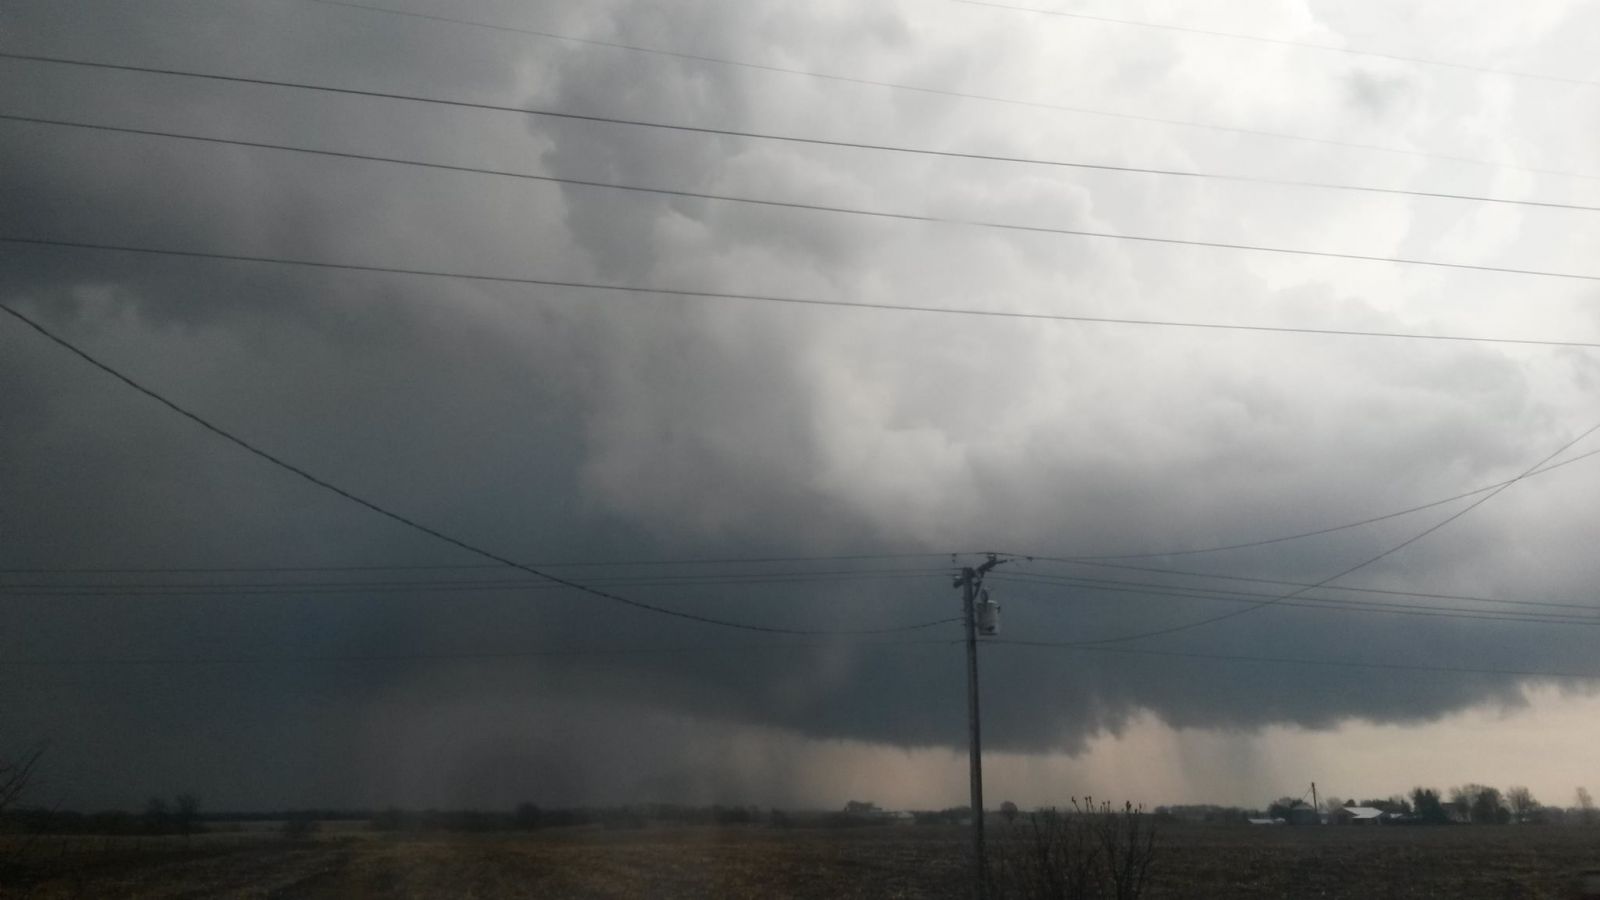 Photo showing a low cloud base and an area of rotation prior to tornado development